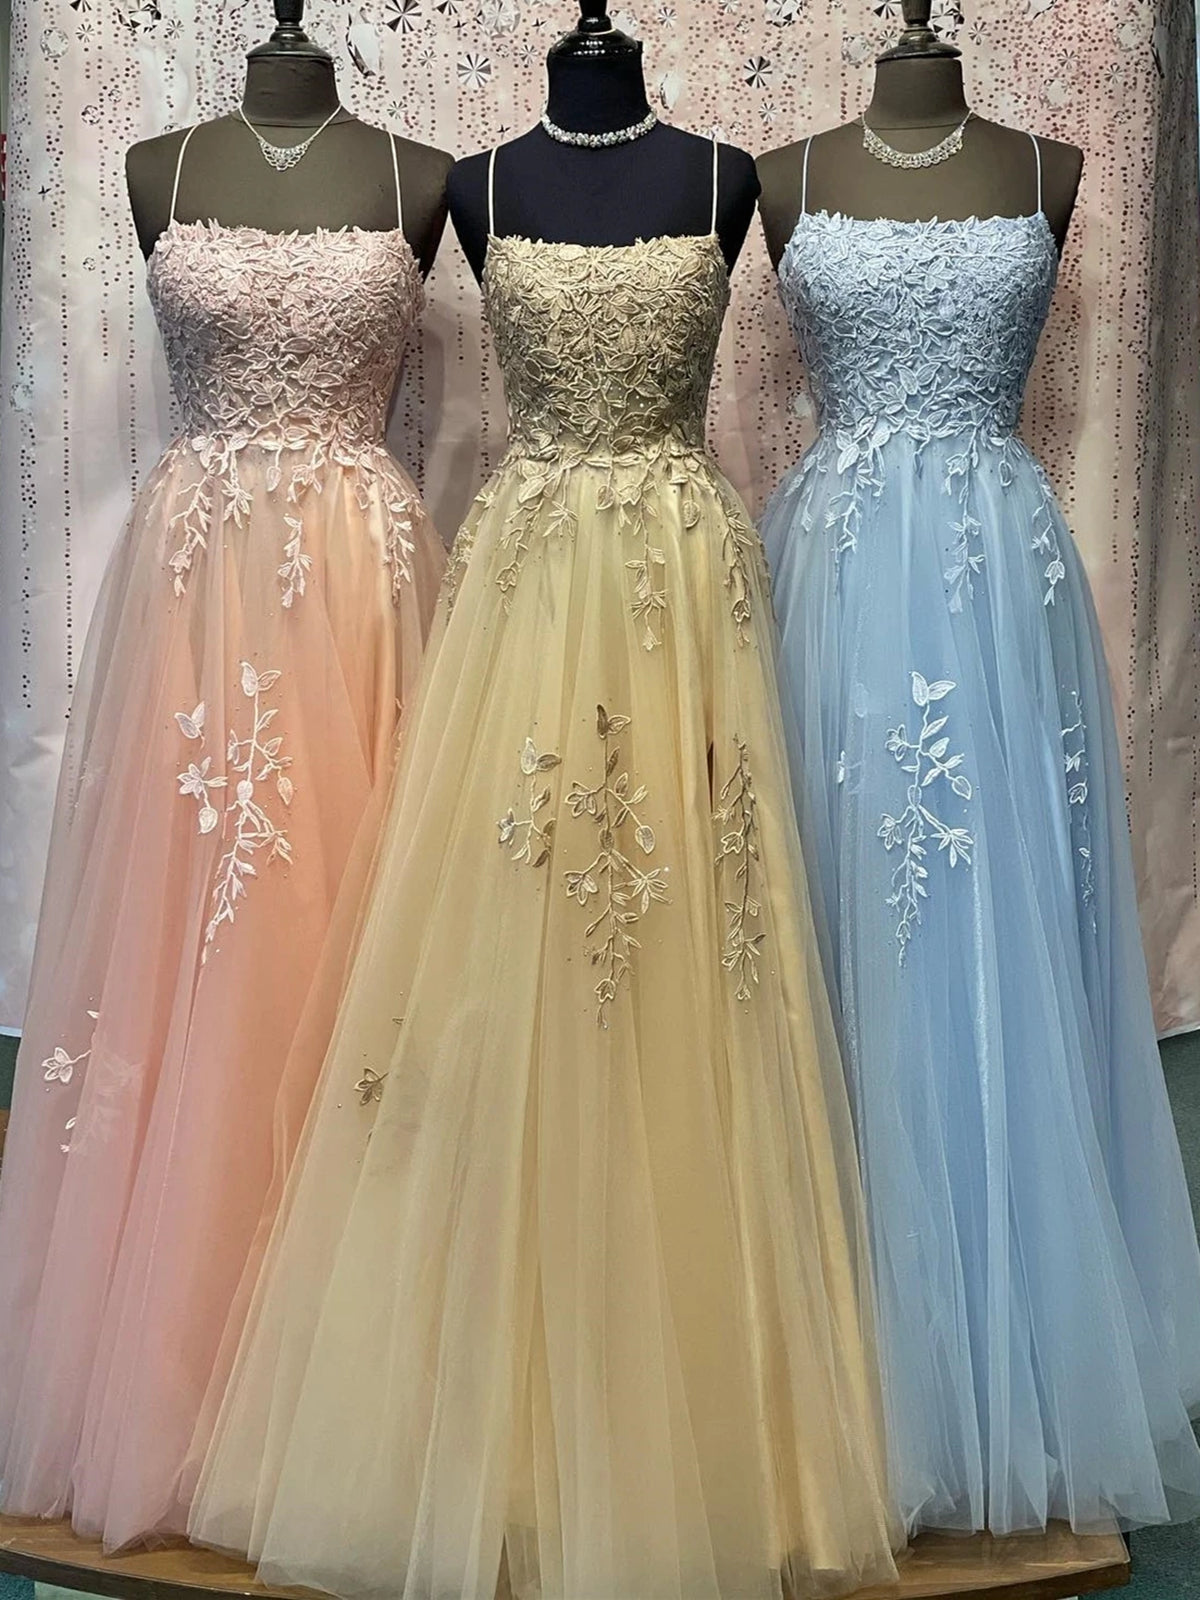 Elegant Long A-line Strapless Spaghetti Straps Beaded Lace Tulle Prom Dresses-BIZTUNNEL